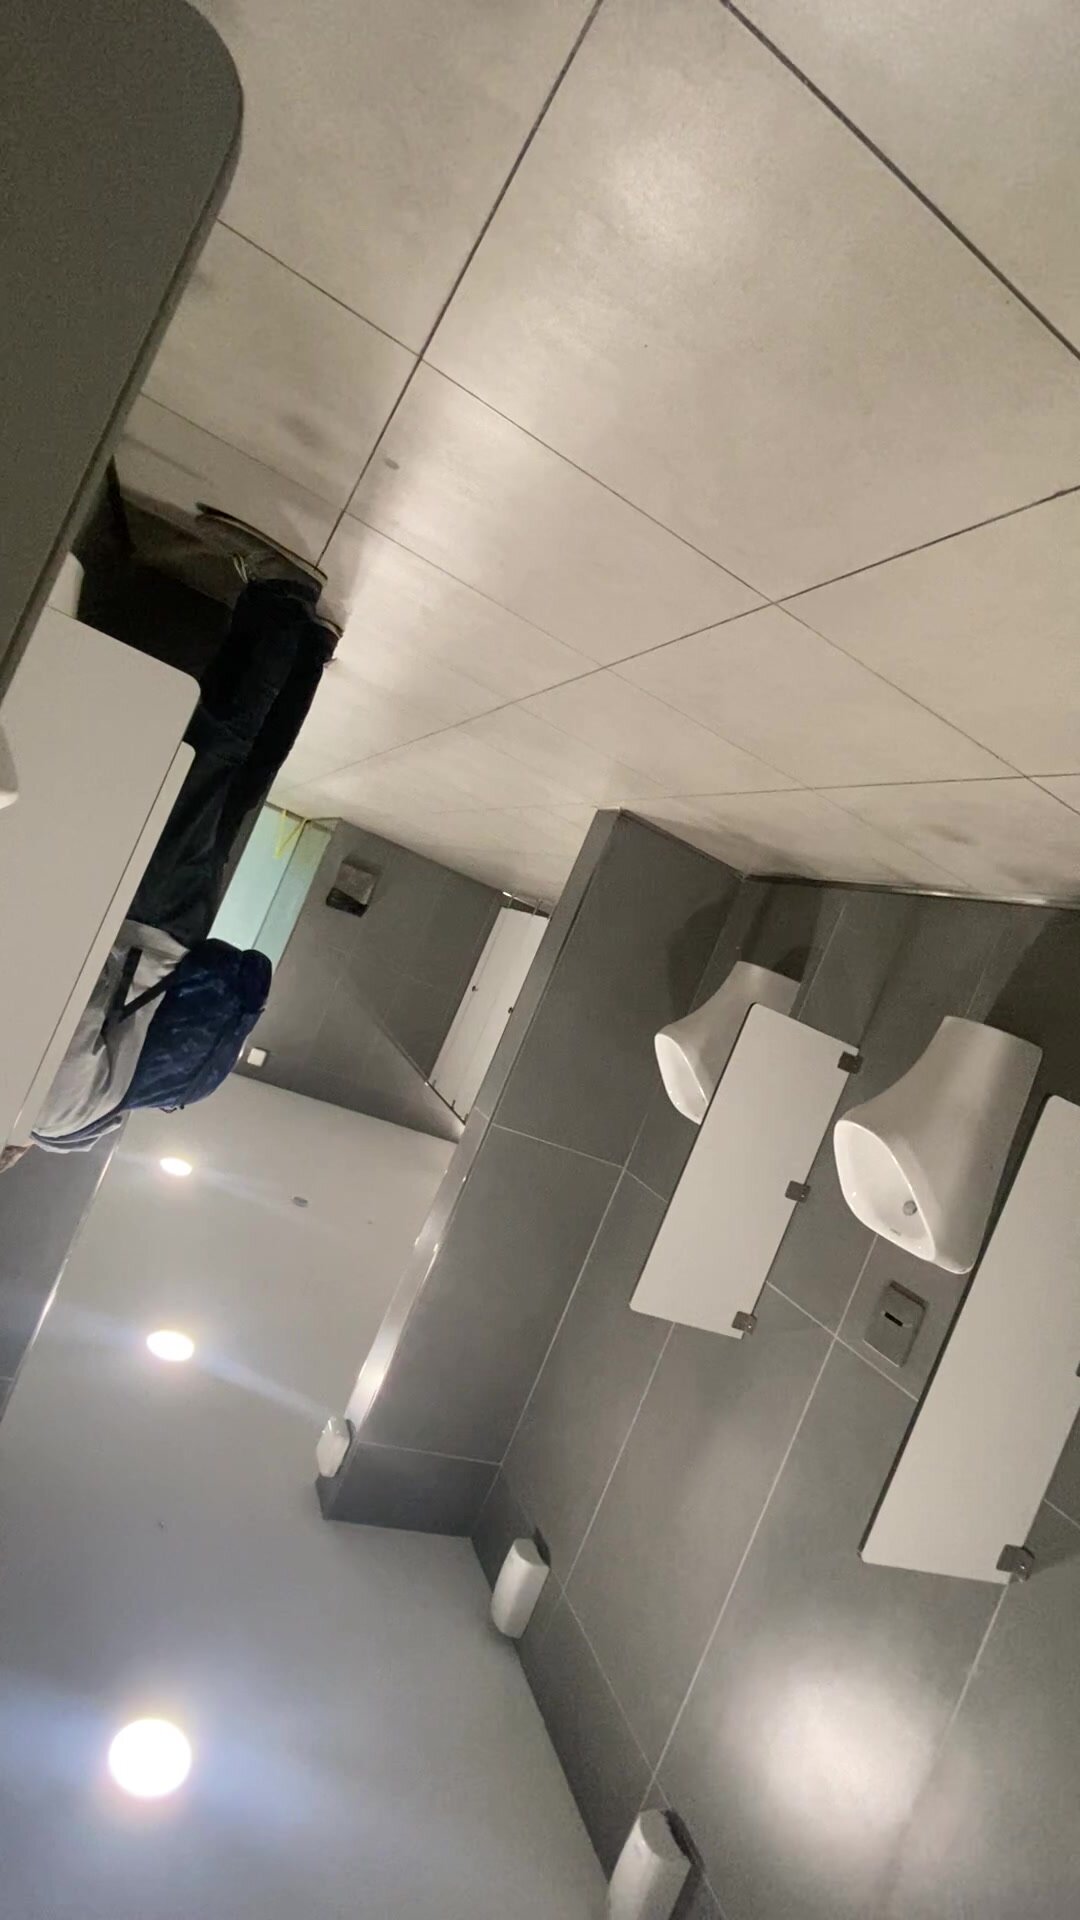 Urinals from behind